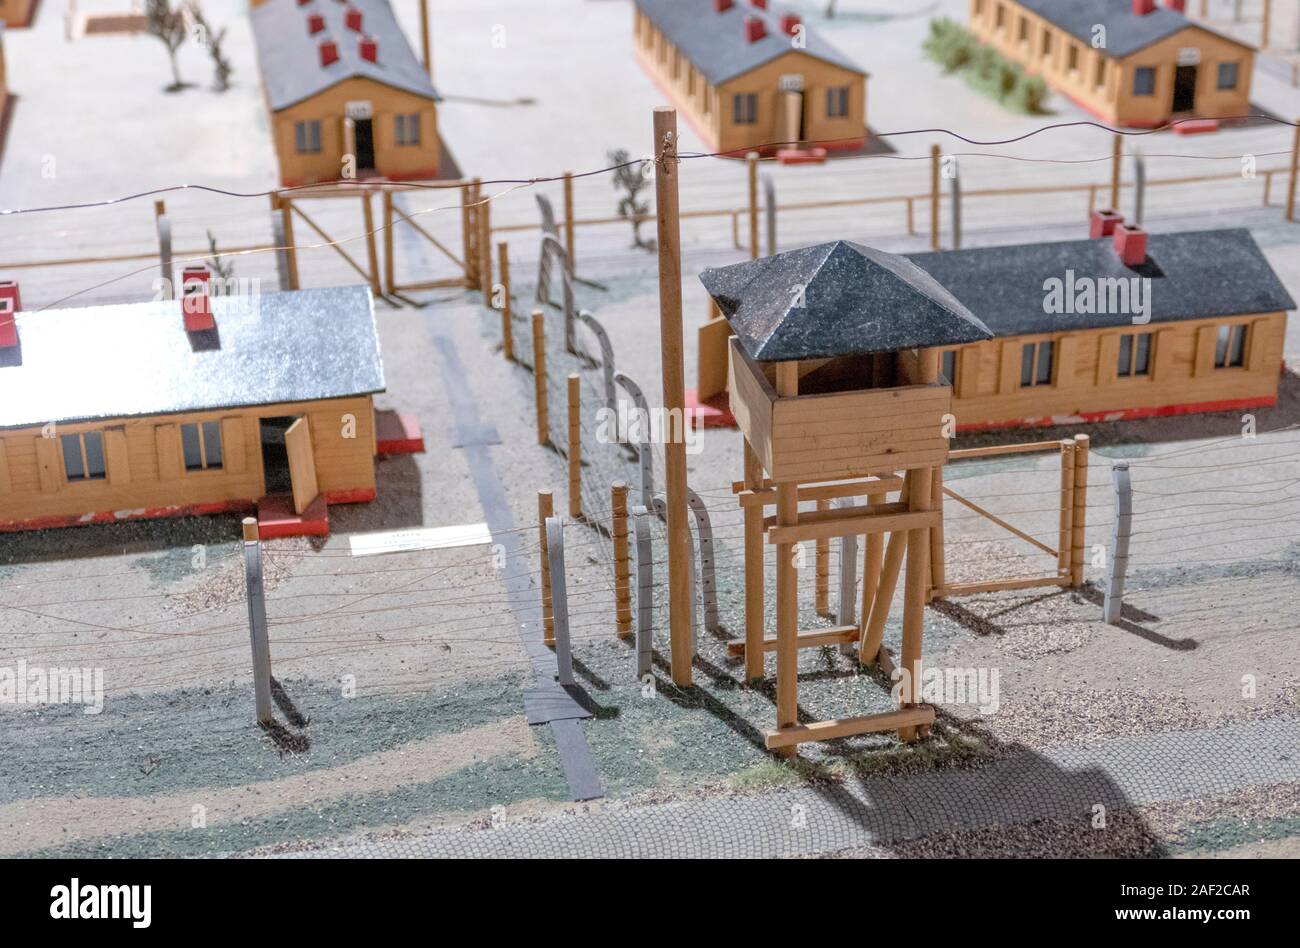 Scale model of the set used to film the movie The Great Escape. Stalag Luft III - Stammlager Luft III near the Polish town of Sagan in Lower Silesia. Stock Photo